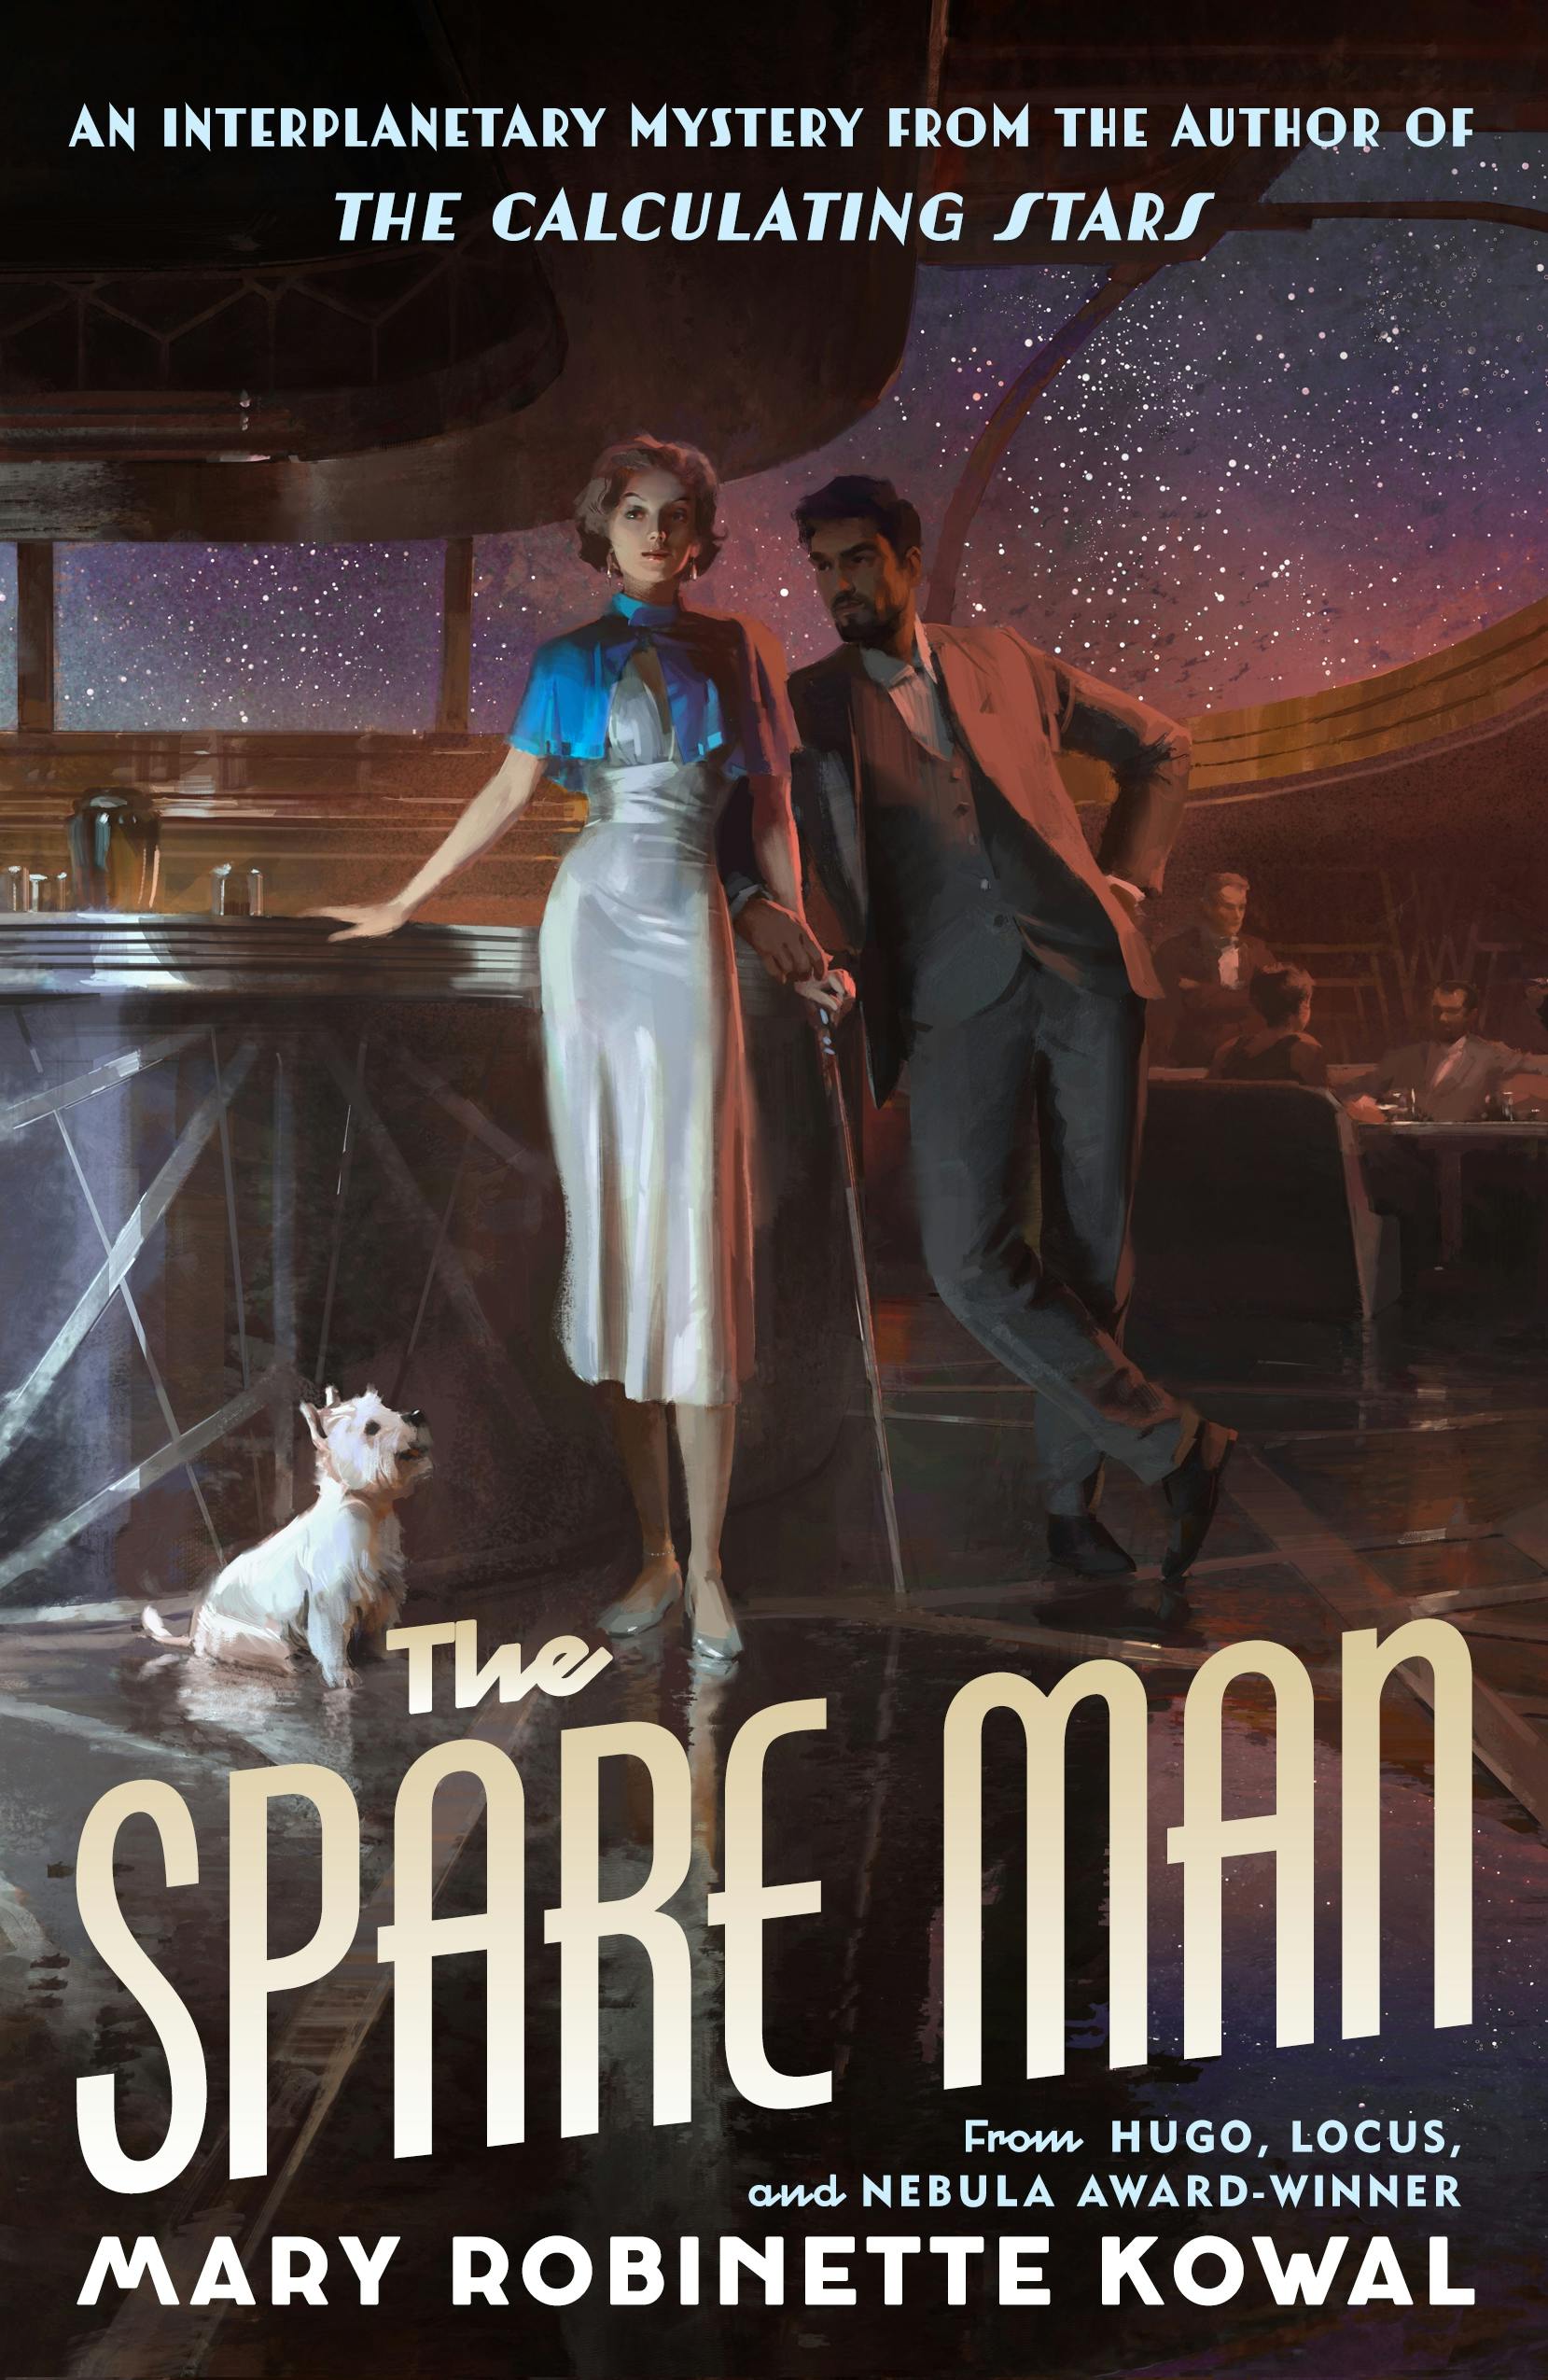 Cover for the book titled as: The Spare Man